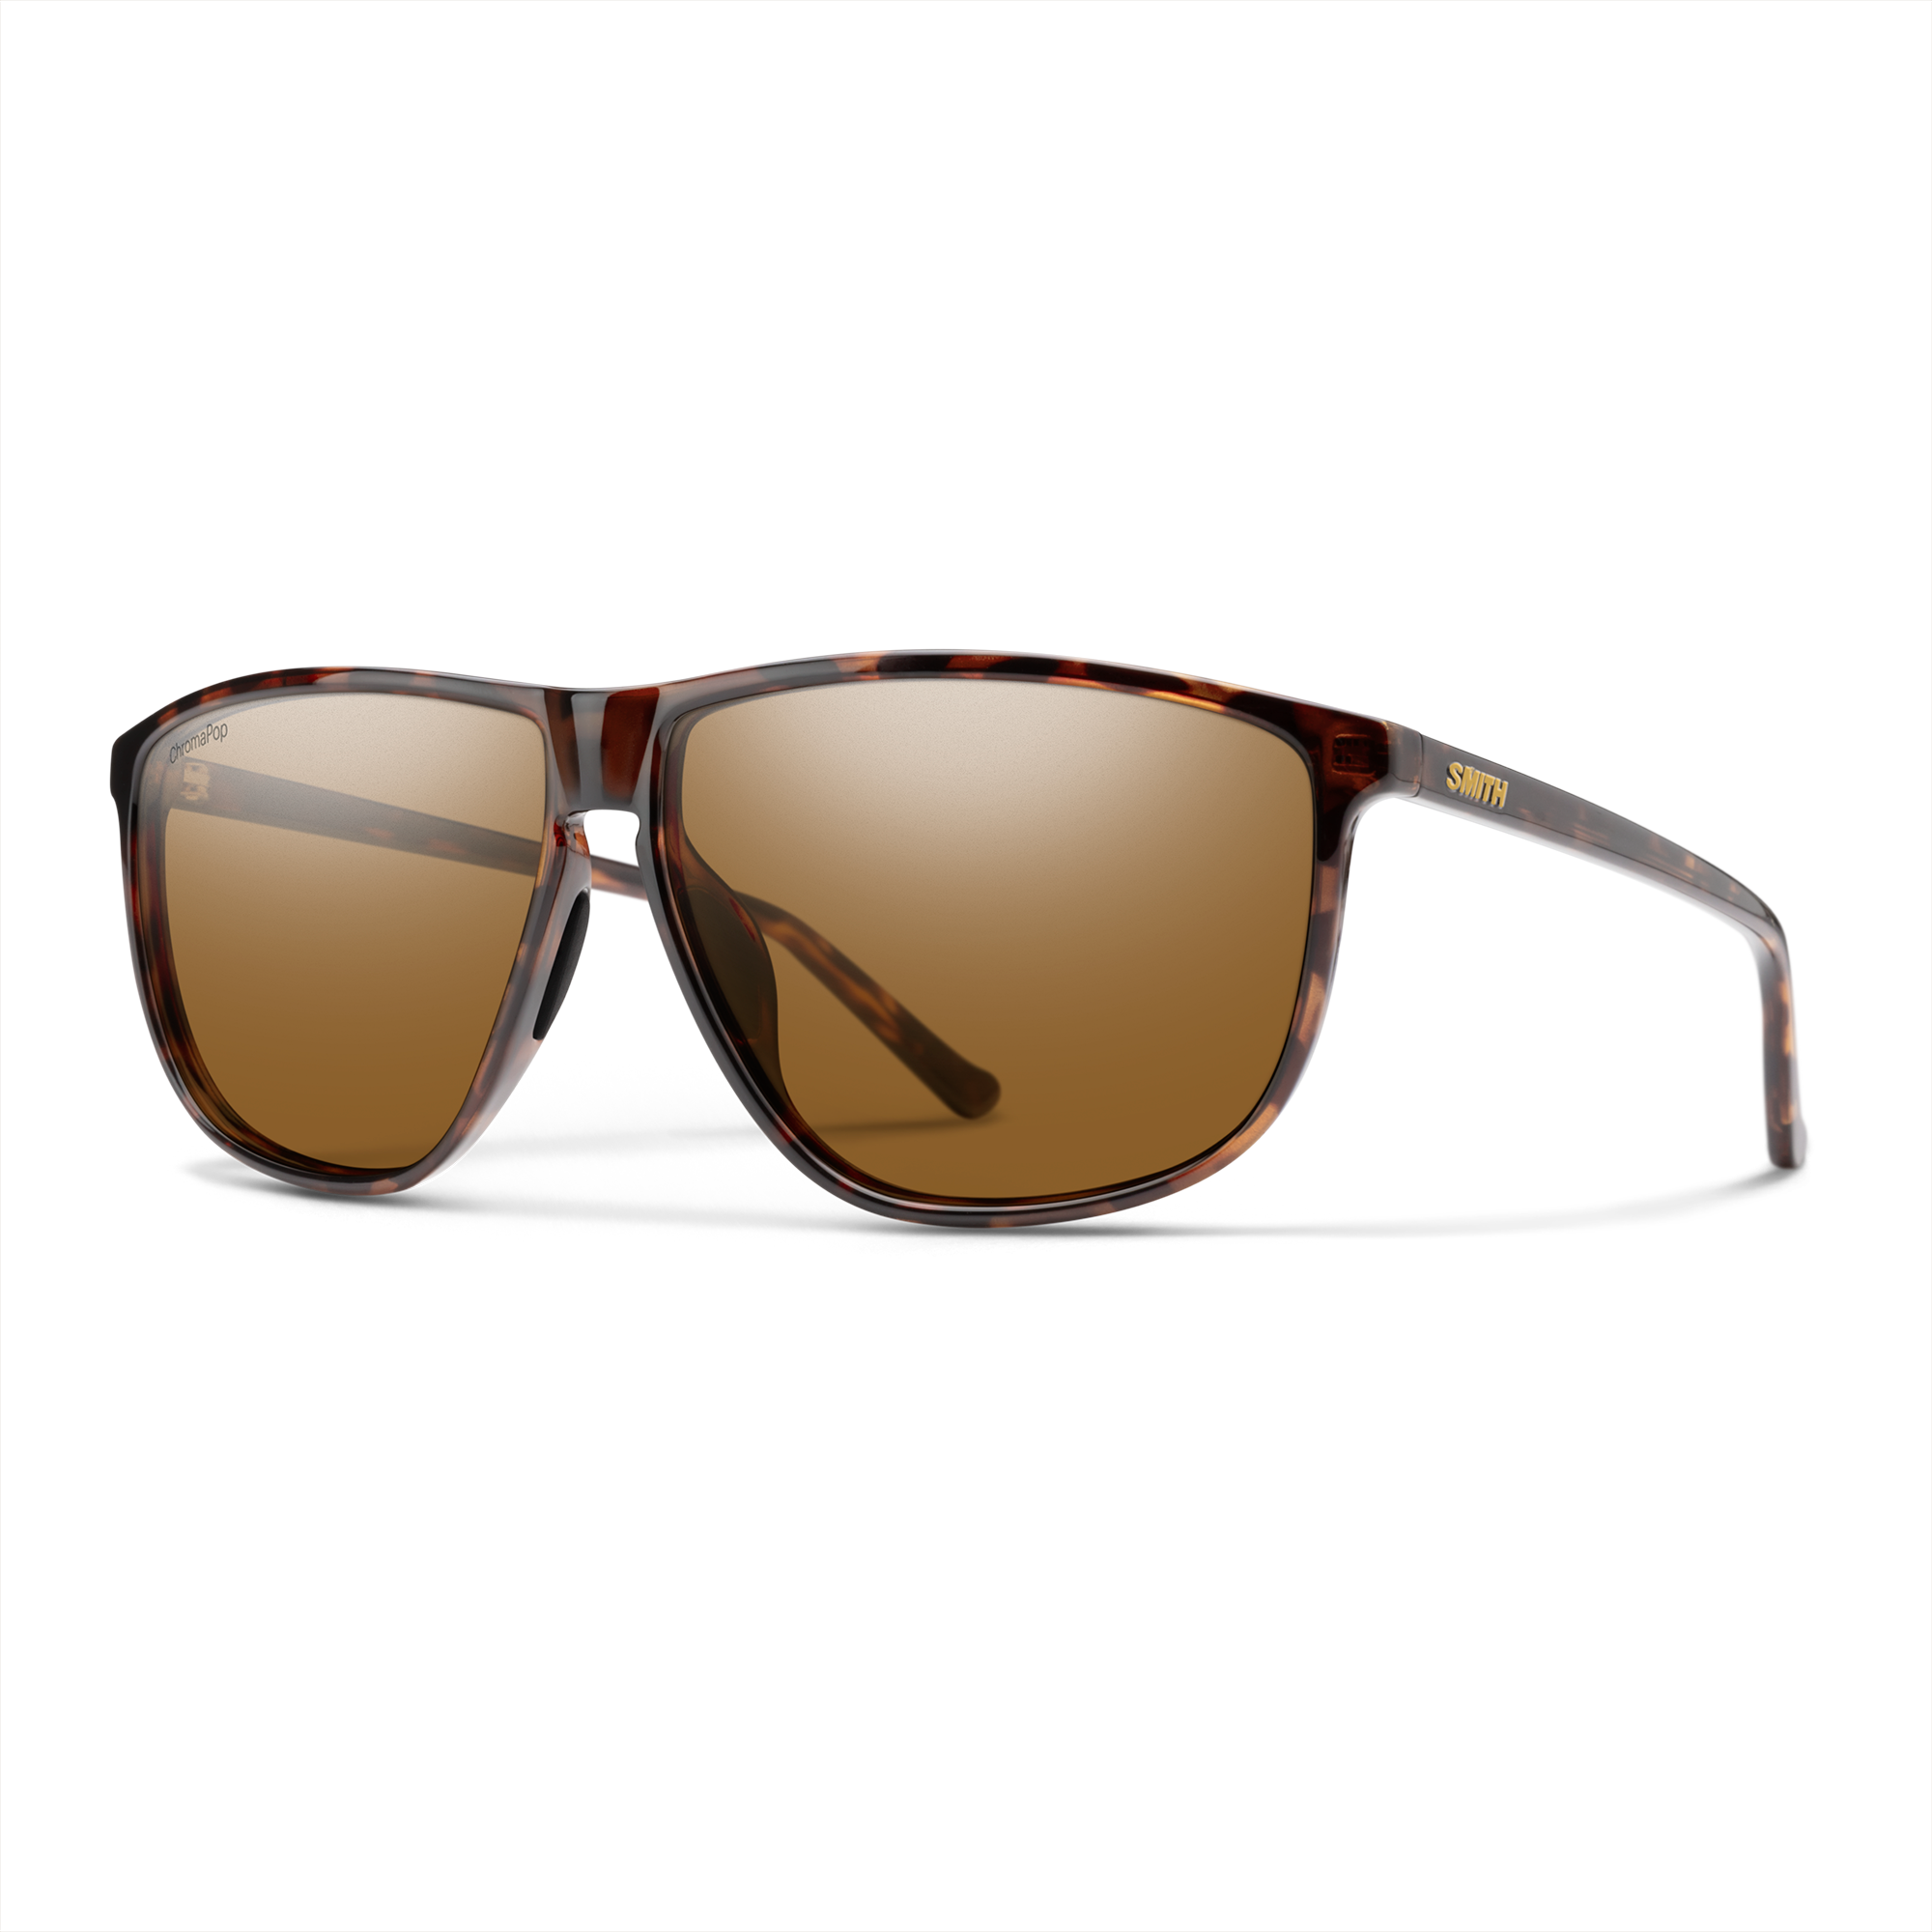 Buy Ted Smith Pilot Brown Graded Polycarbonate Sunglasses For Men Women at